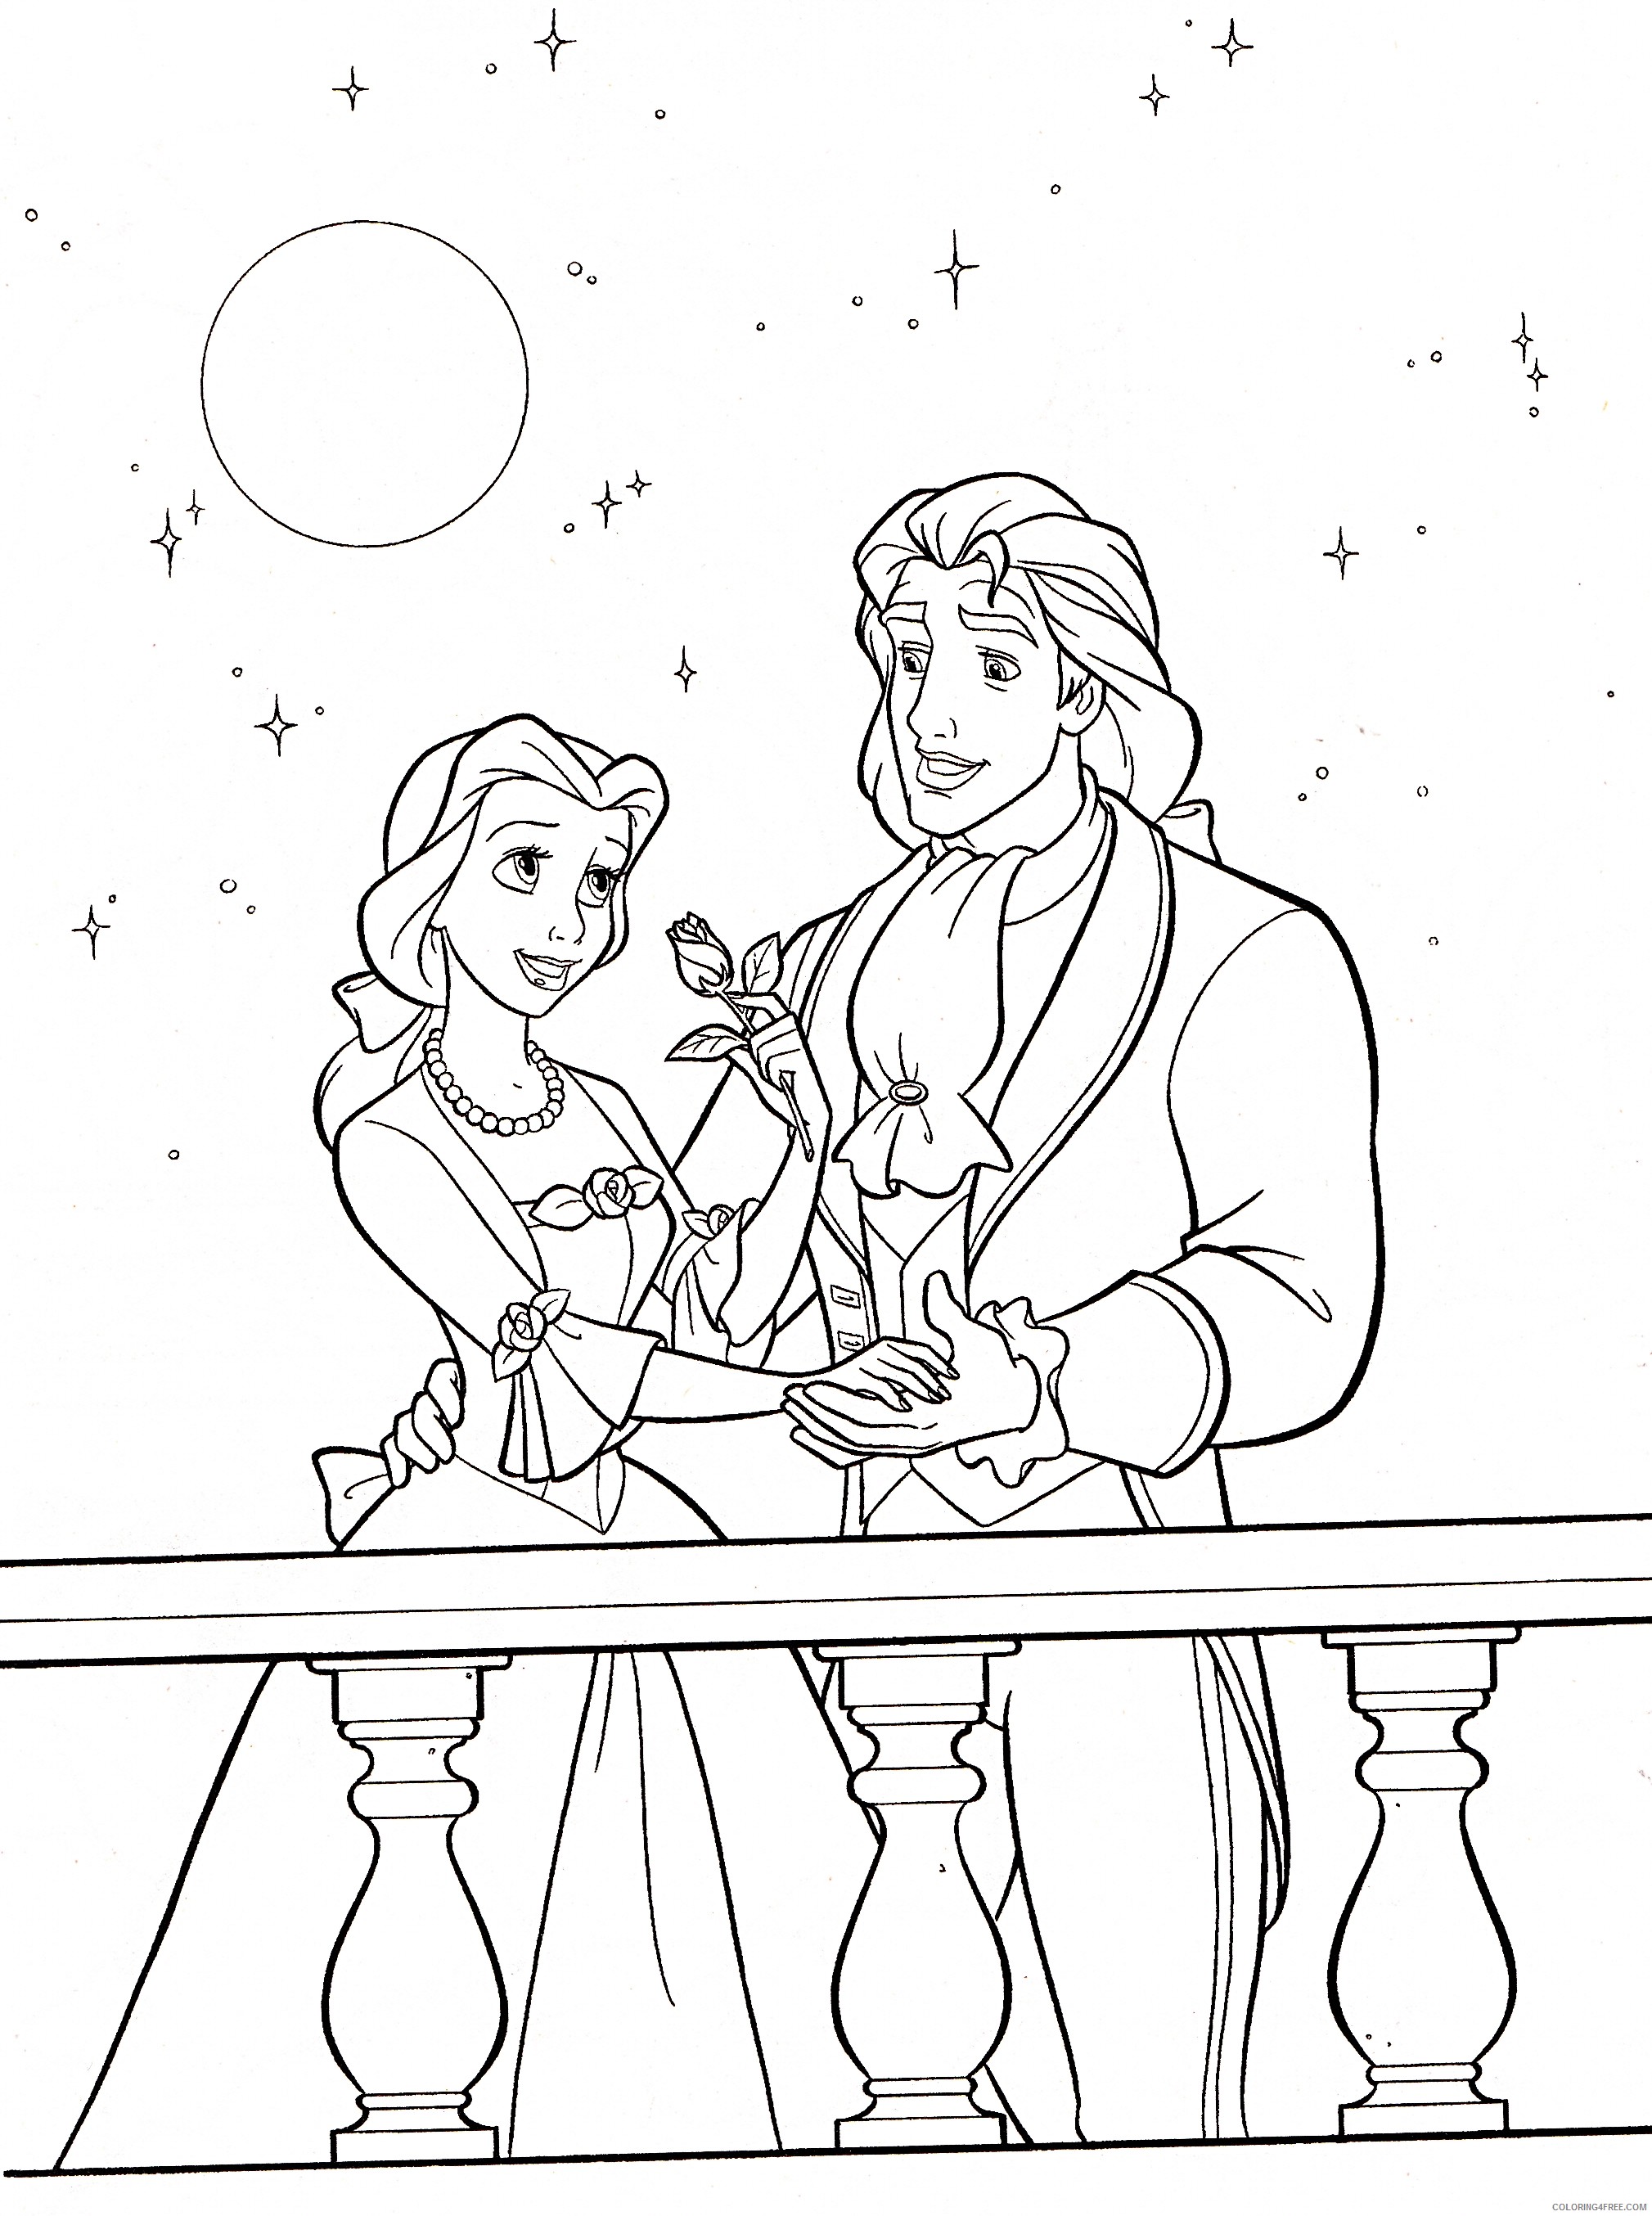 belle coloring pages and the beast Coloring4free - Coloring4Free.com